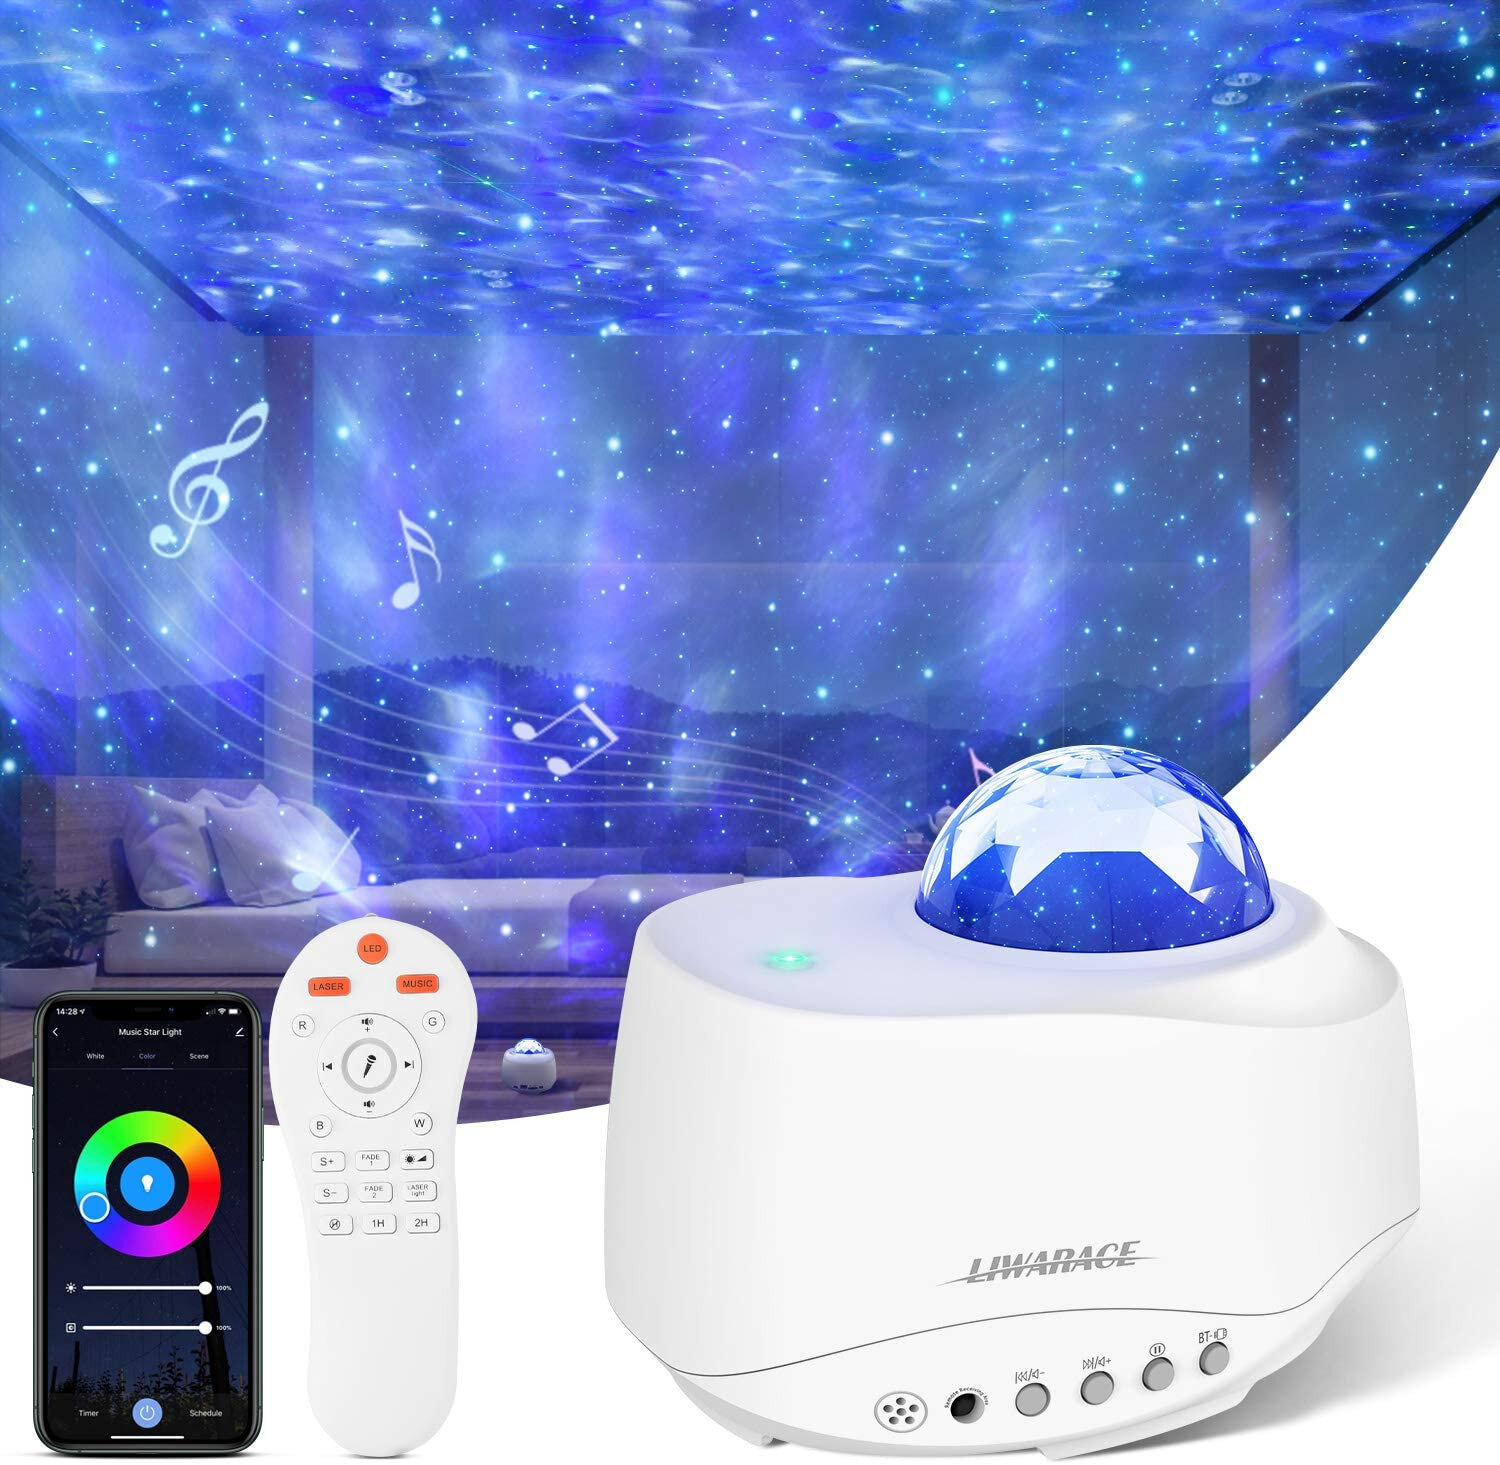 Bluetooth Music Speaker Galaxy Projector Star Projector-15 Colors LED Starry Night Light Projector for Bedroom with Remote Control Skylight for Ceiling with Ocean Wave Home Deco for Adults or Kids